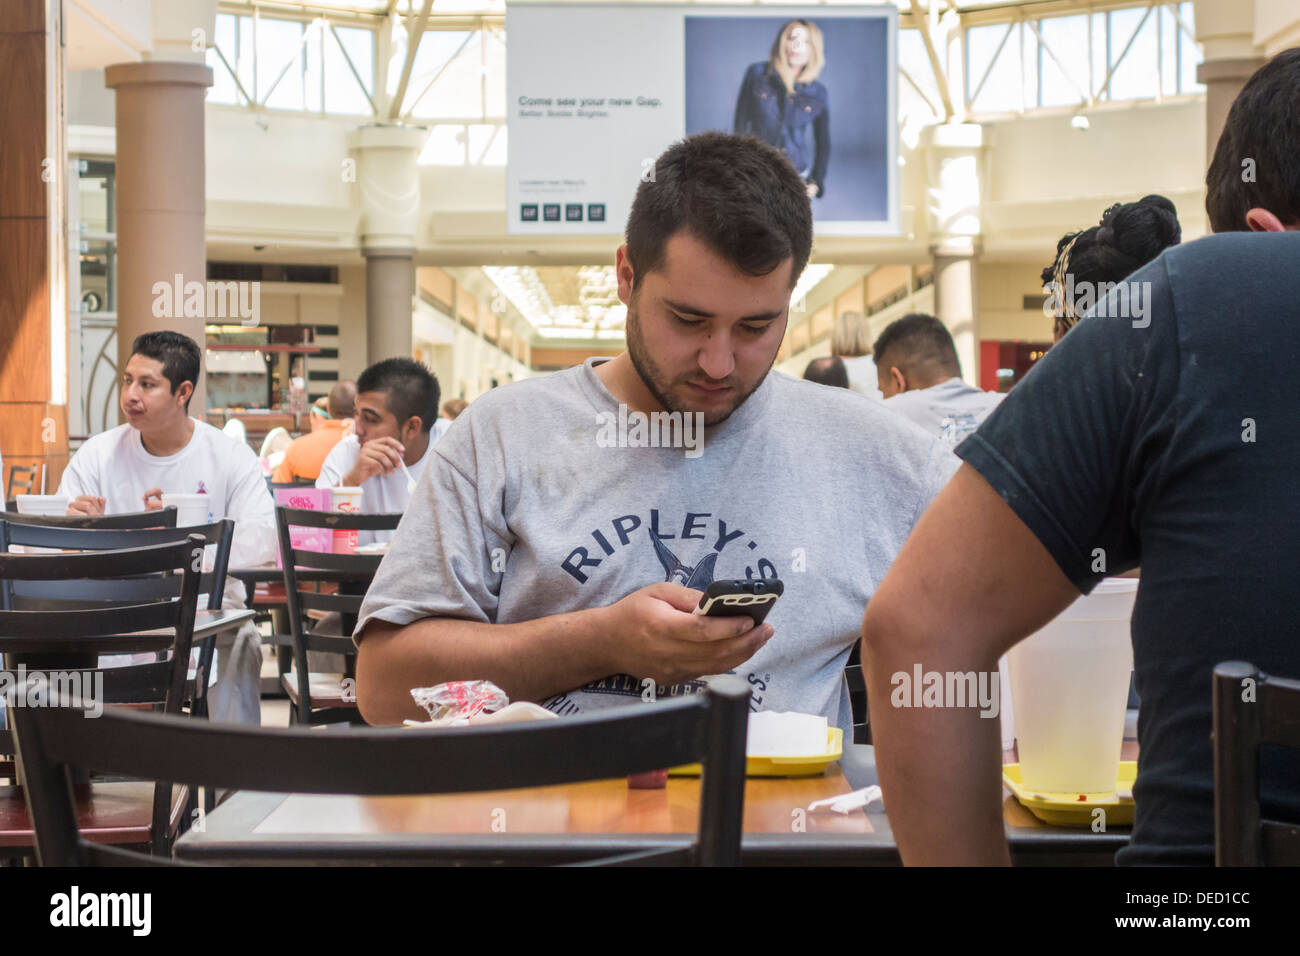 A young man in his mid 20s is engrossed in his cell phone while eating in a food court in a shopping mall. Oklahoma City, Oklahoma, USA. Stock Photo